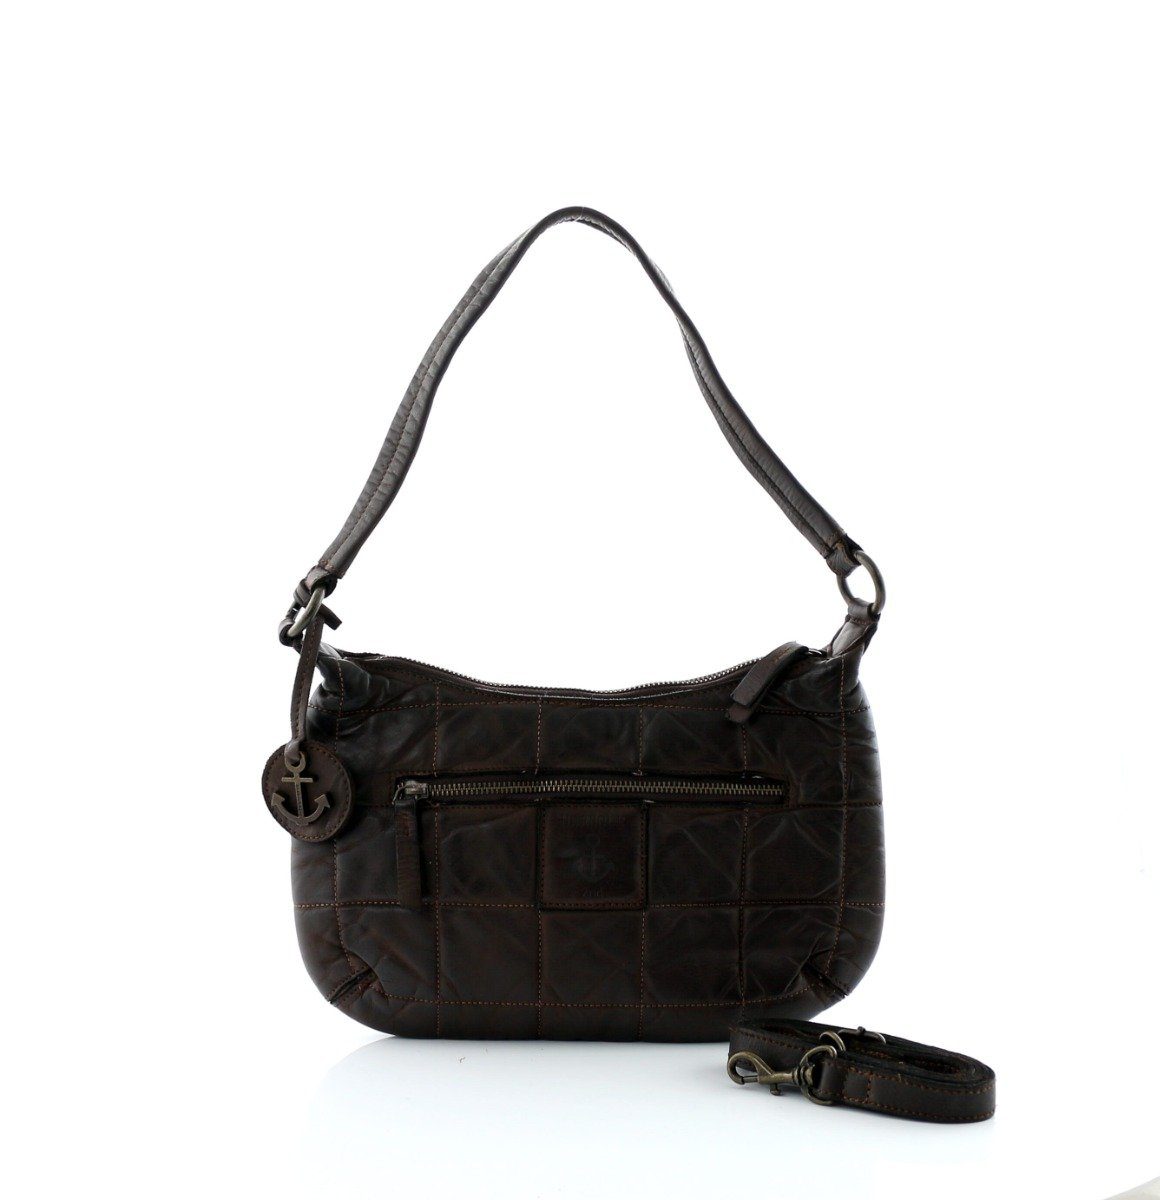 HARBOUR Brown Handtasche Abagail 2nd